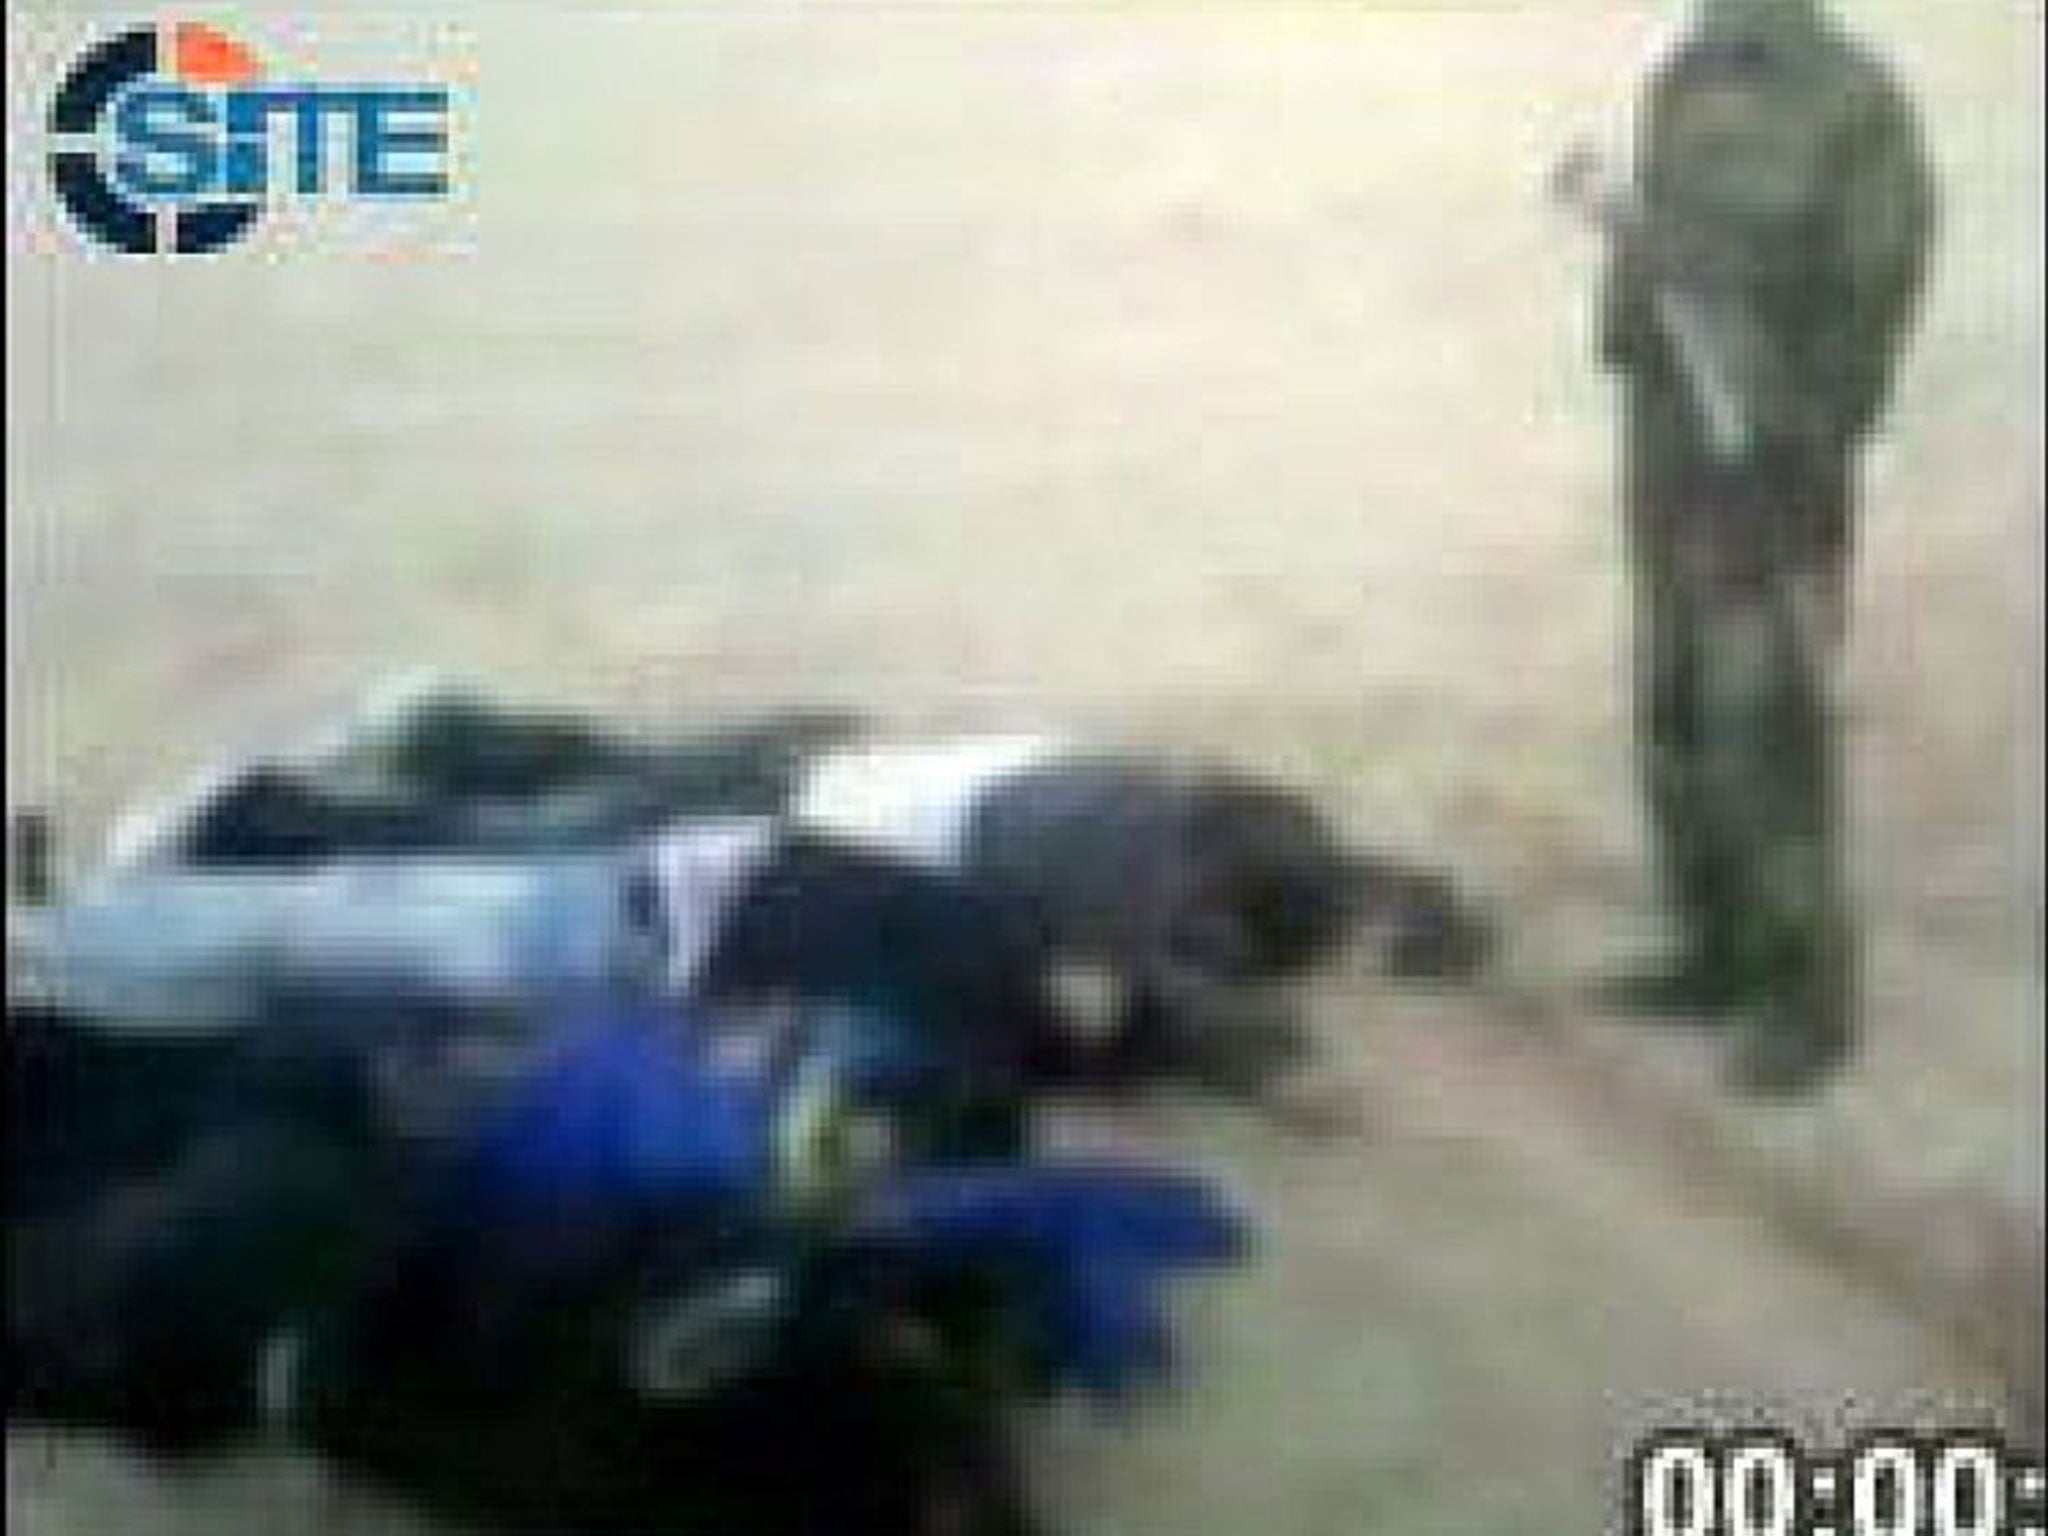 A Nigerian Islamist group has released screen shots of a video purporting to show dead hostages